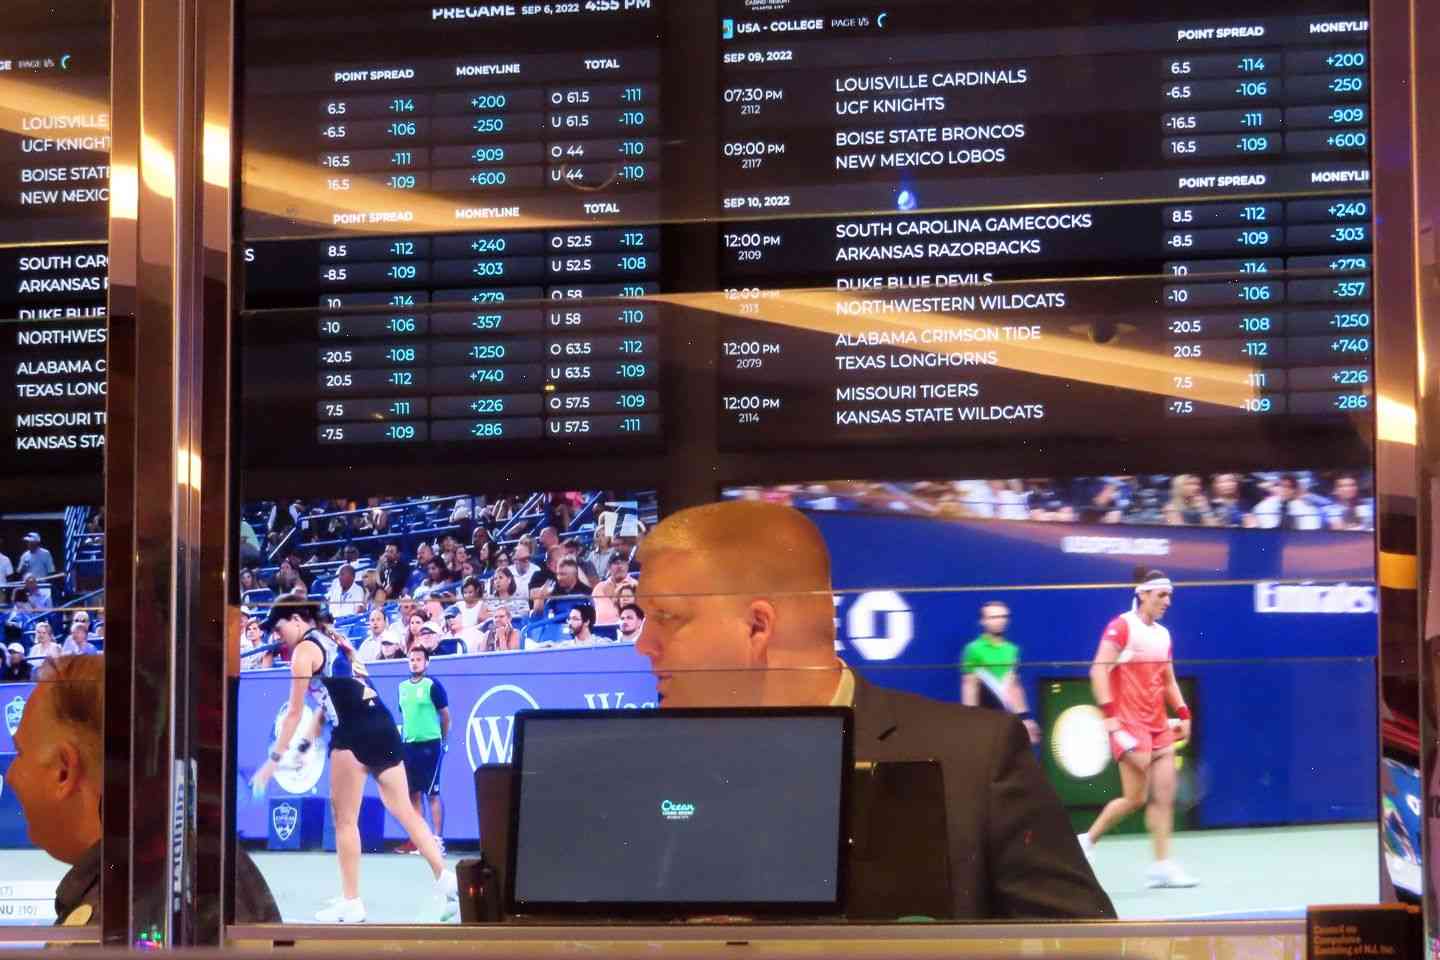 The U.S. sports betting industry is expected to grow to $4.3 billion in five years